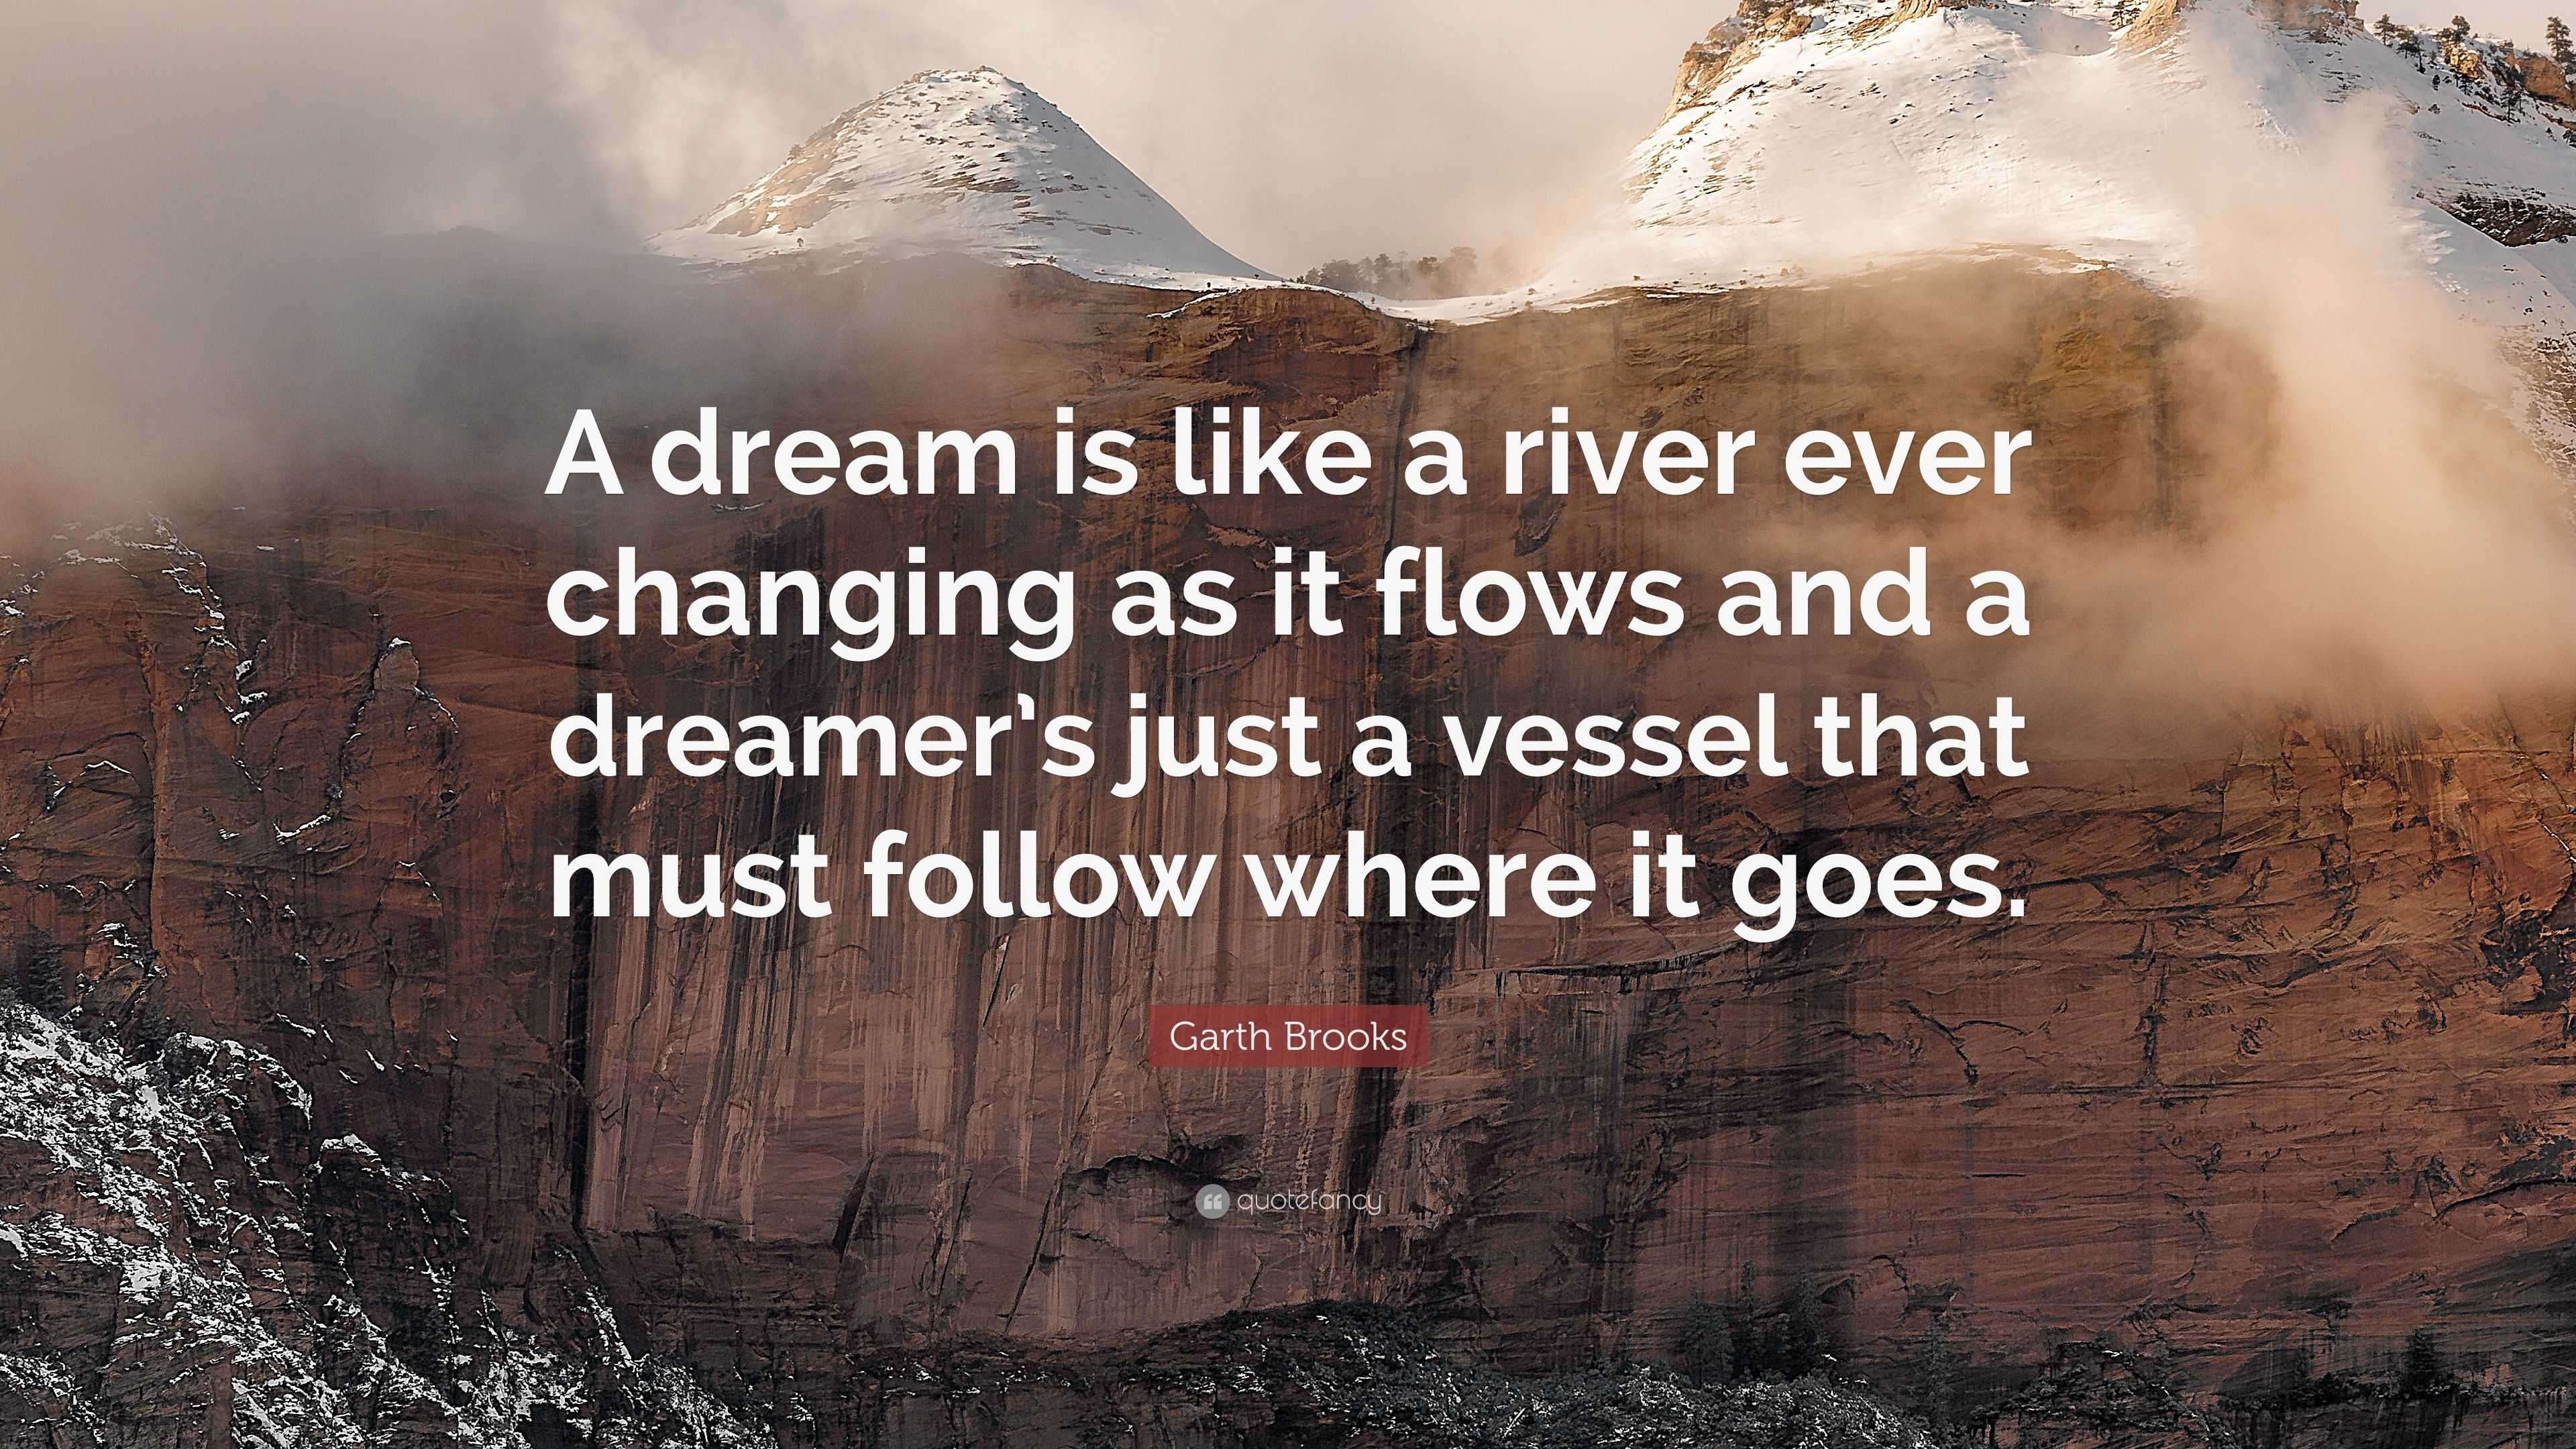 Garth Brooks Quote “A dream is like a river ever changing as it flows